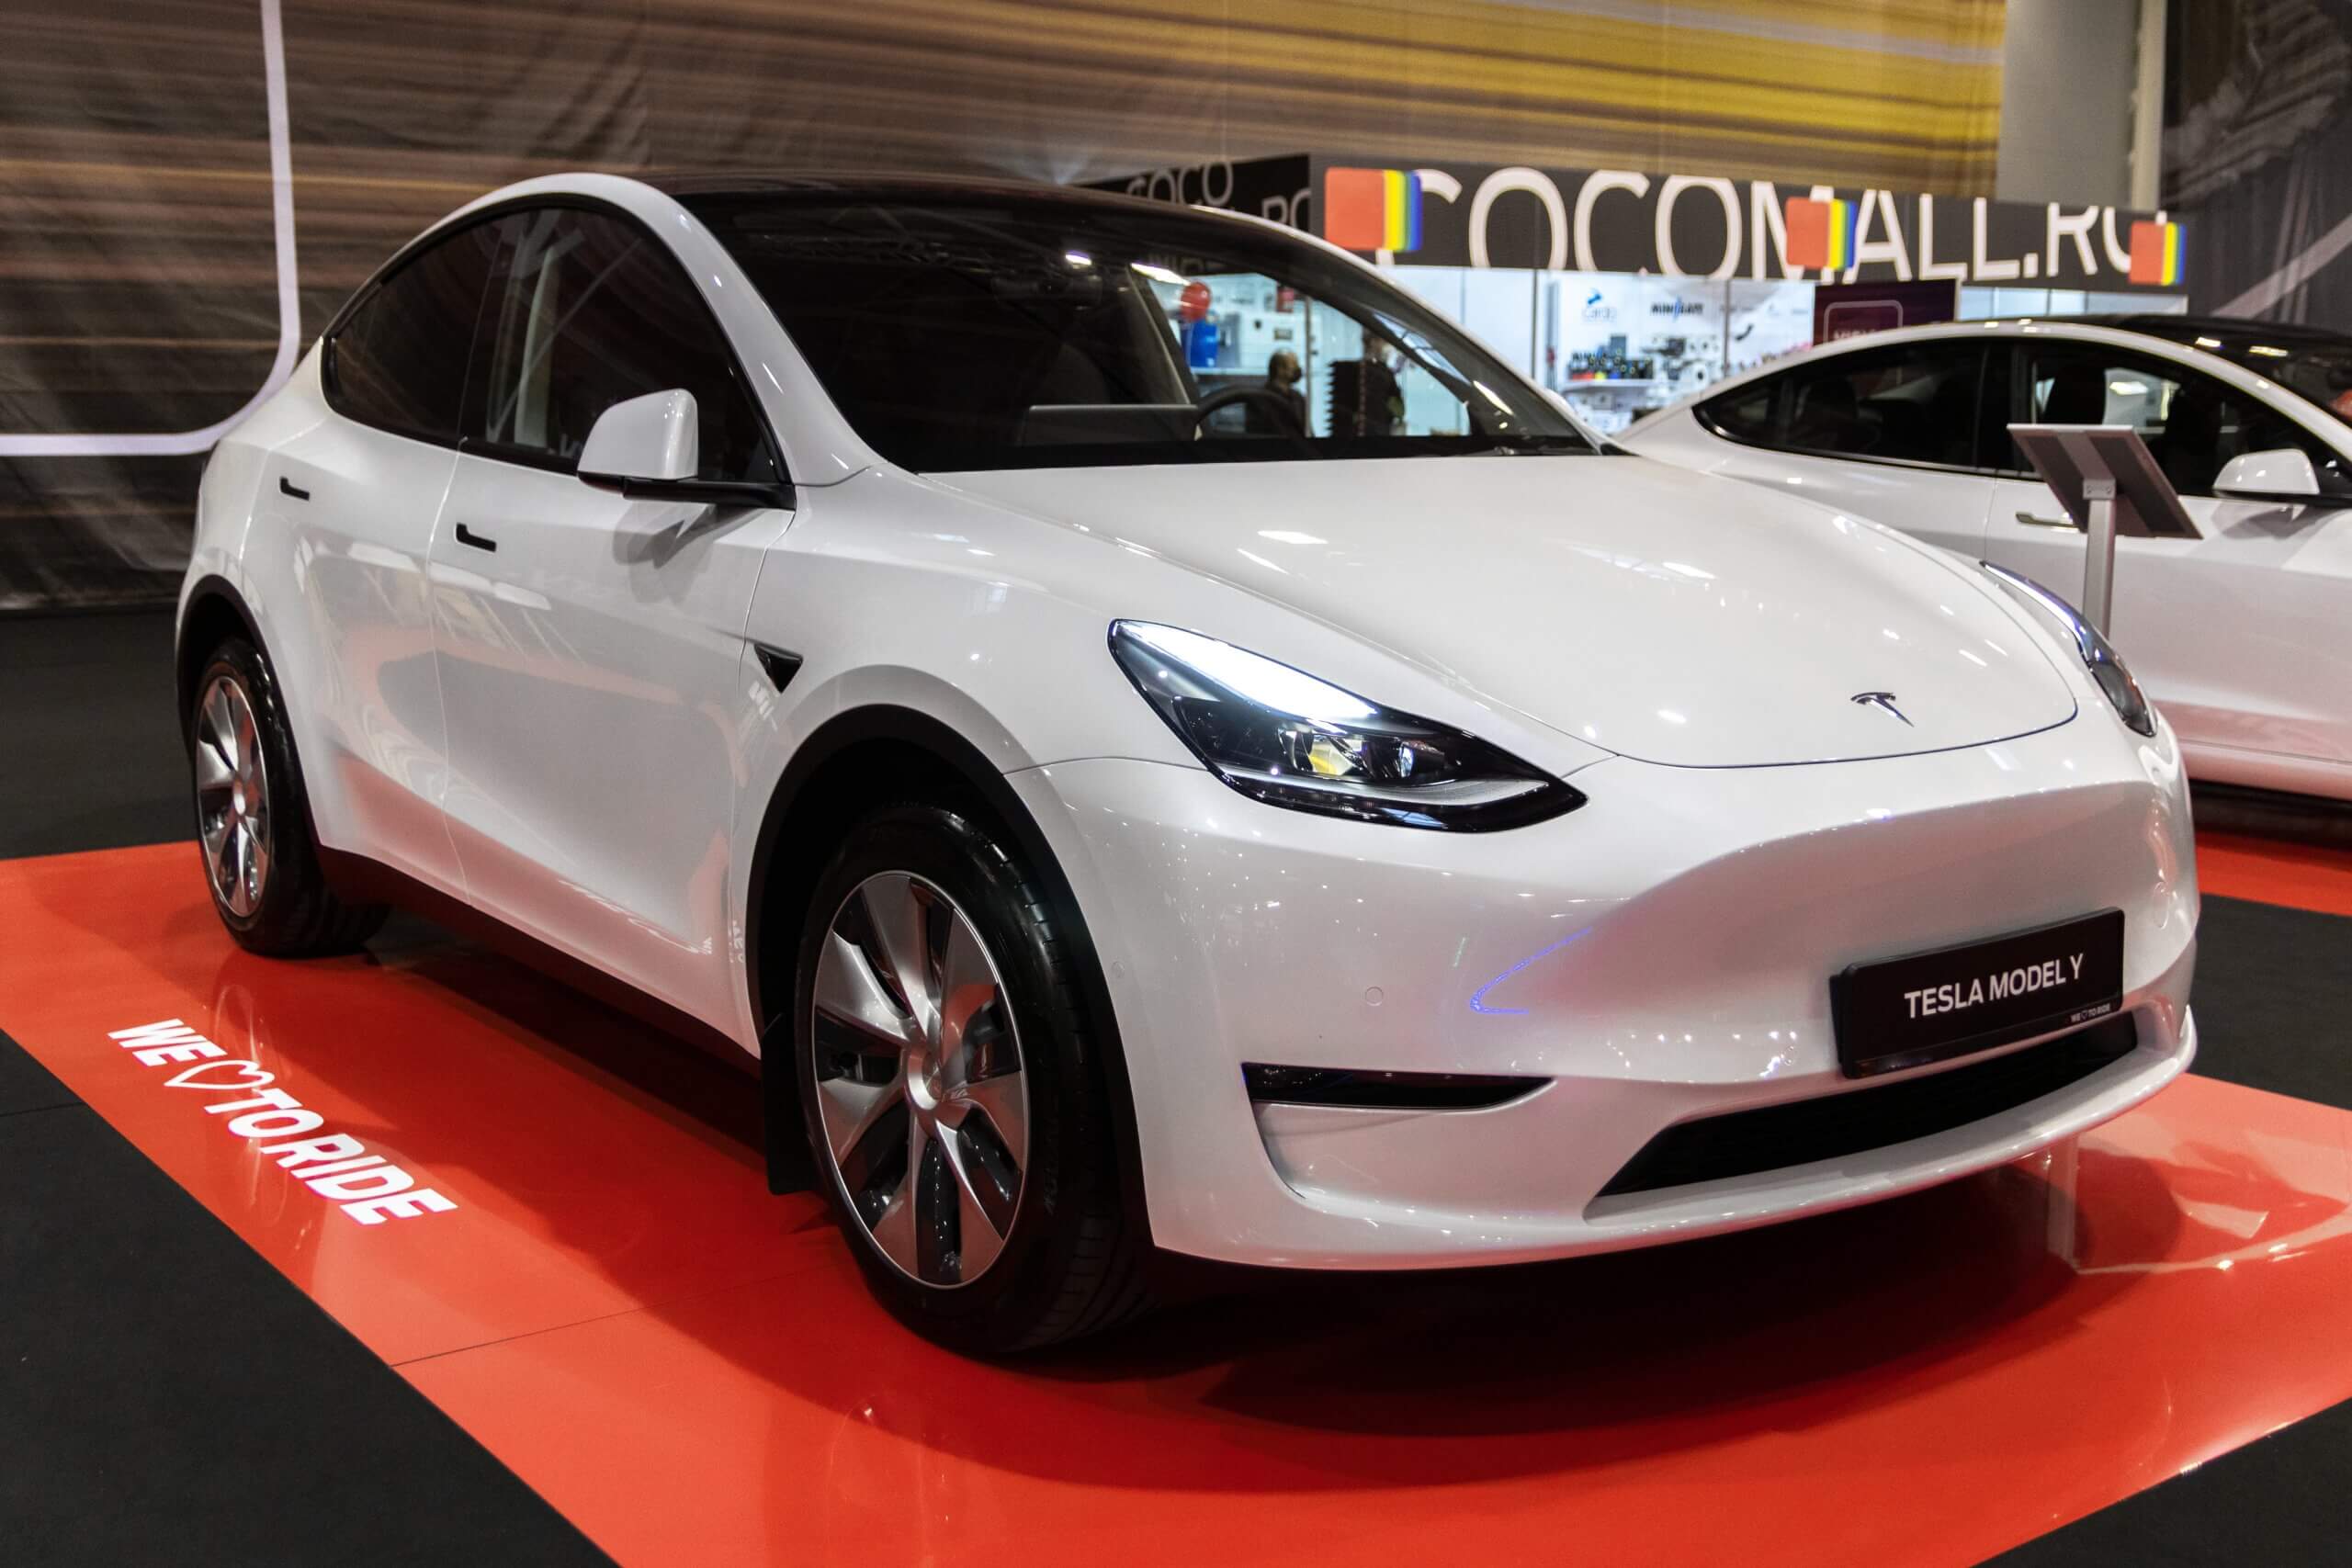 Is the Tesla Model Y heading to India?